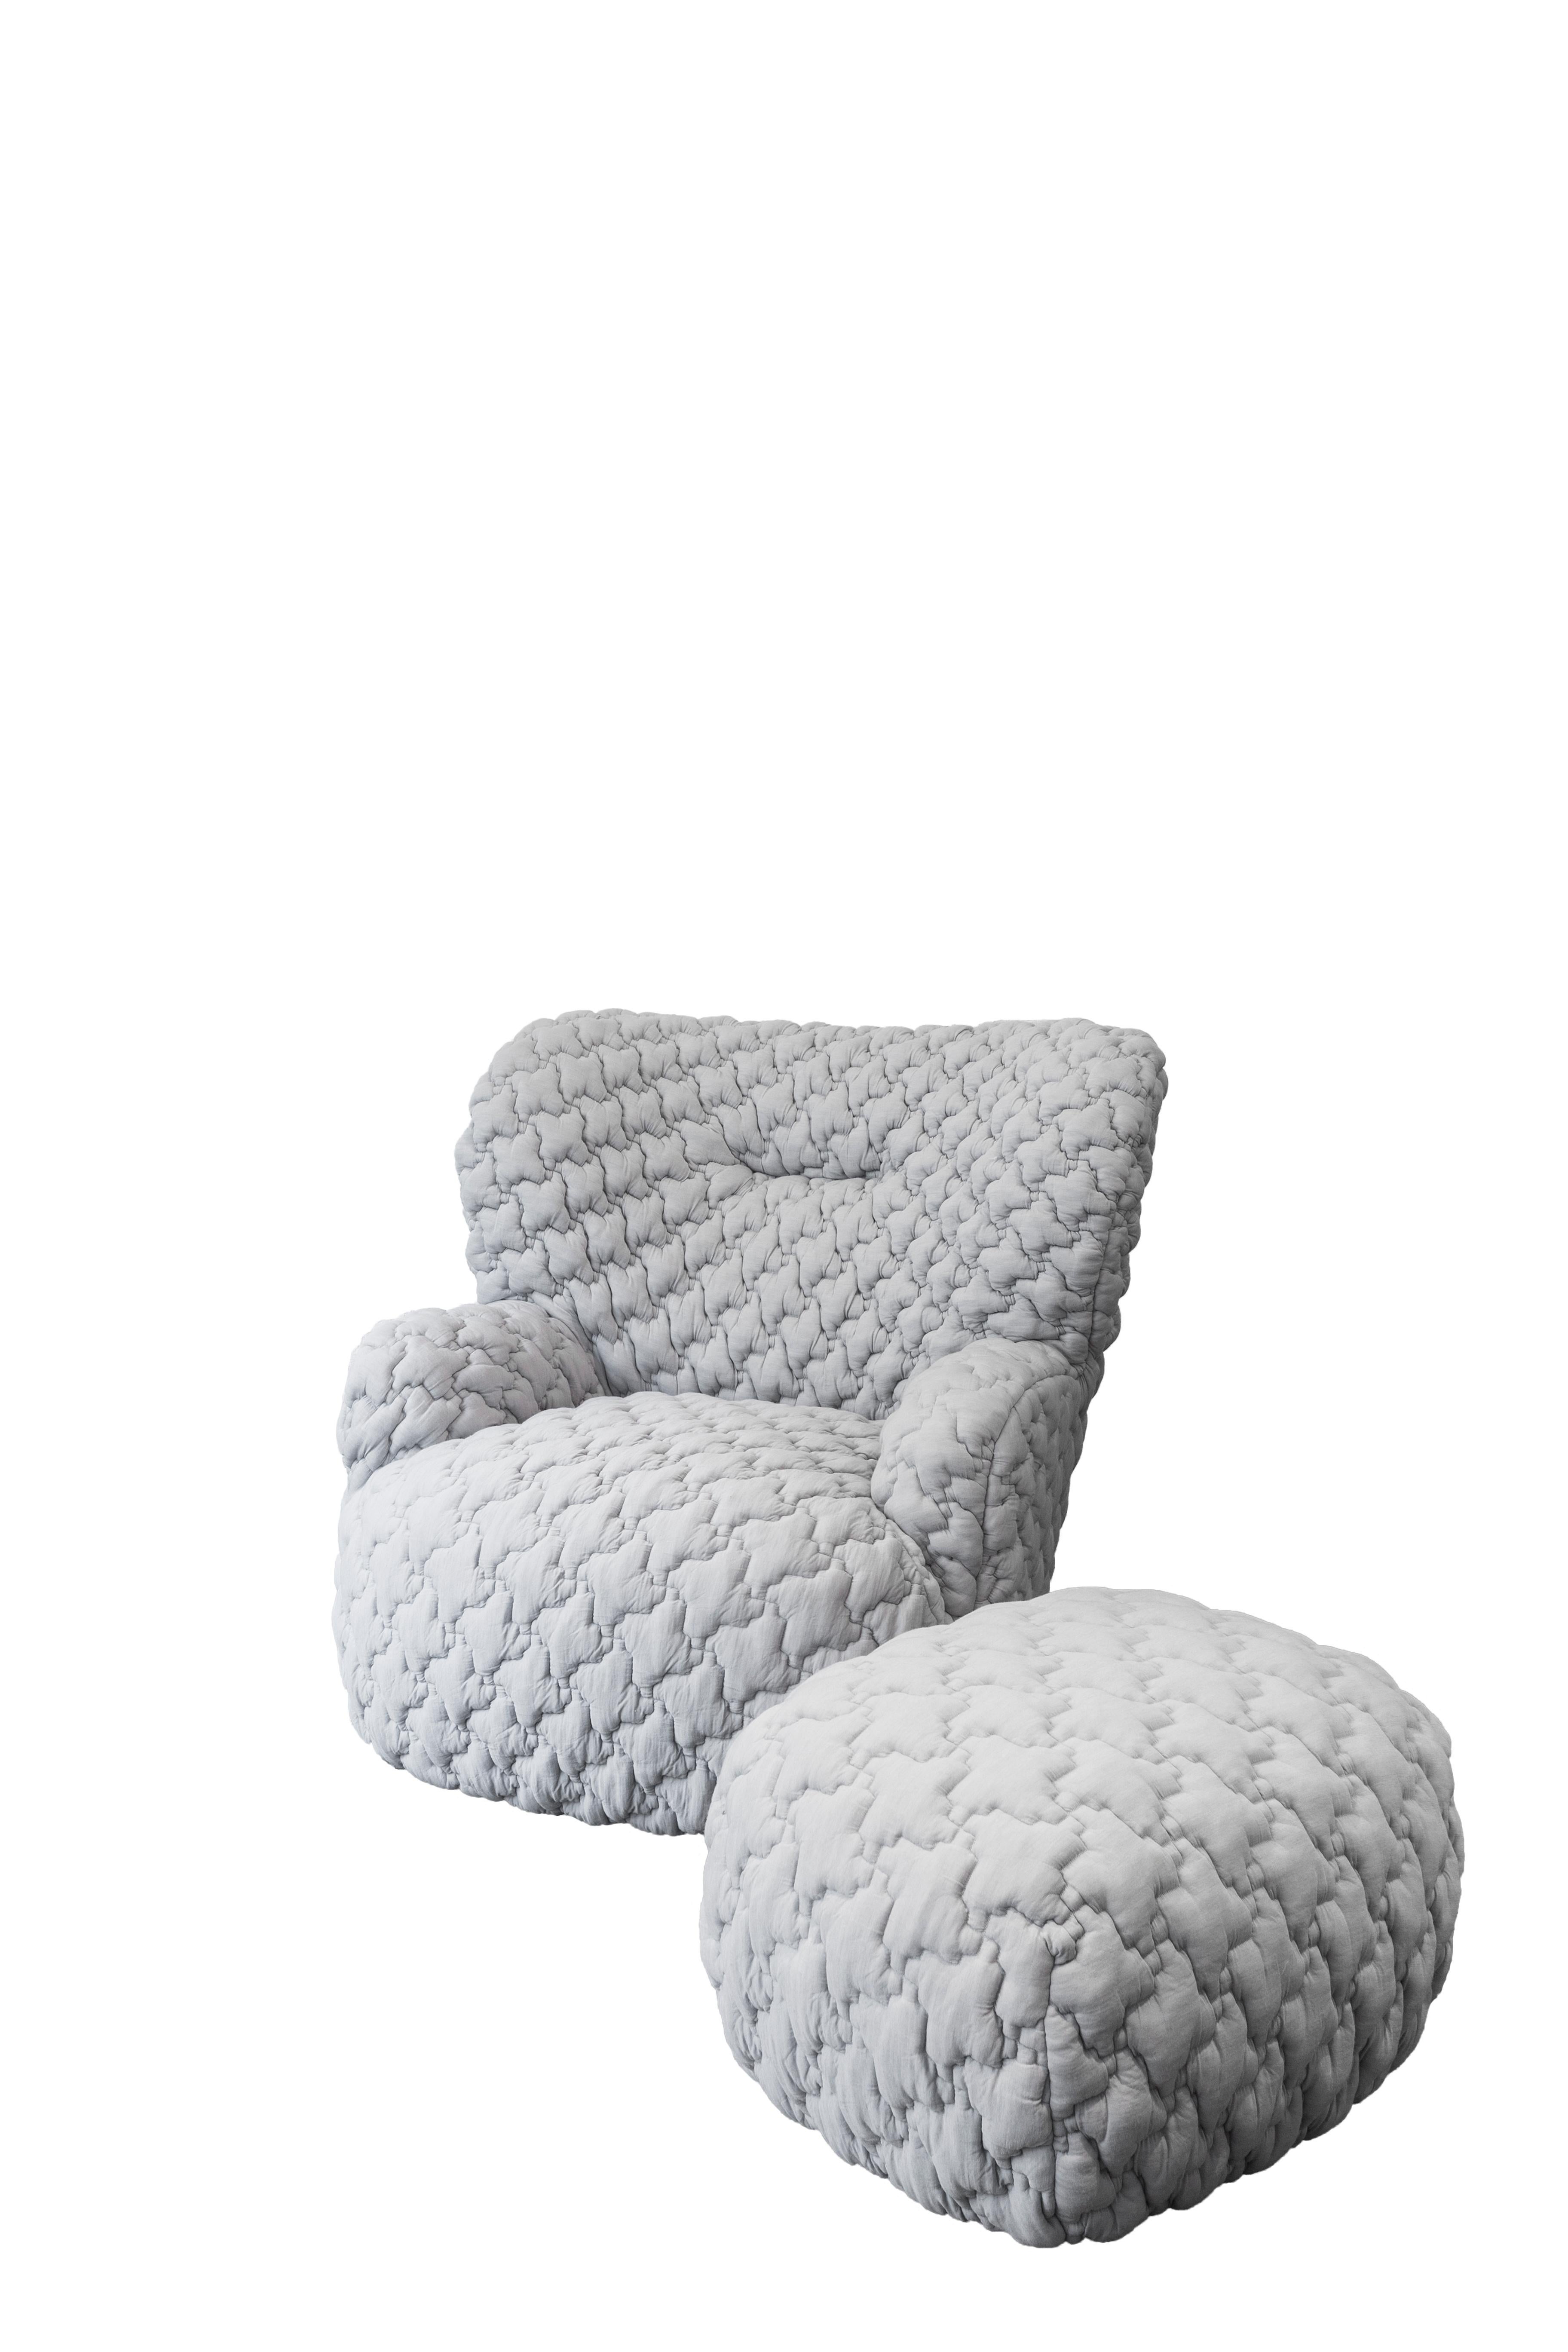 fauteuil paola navone